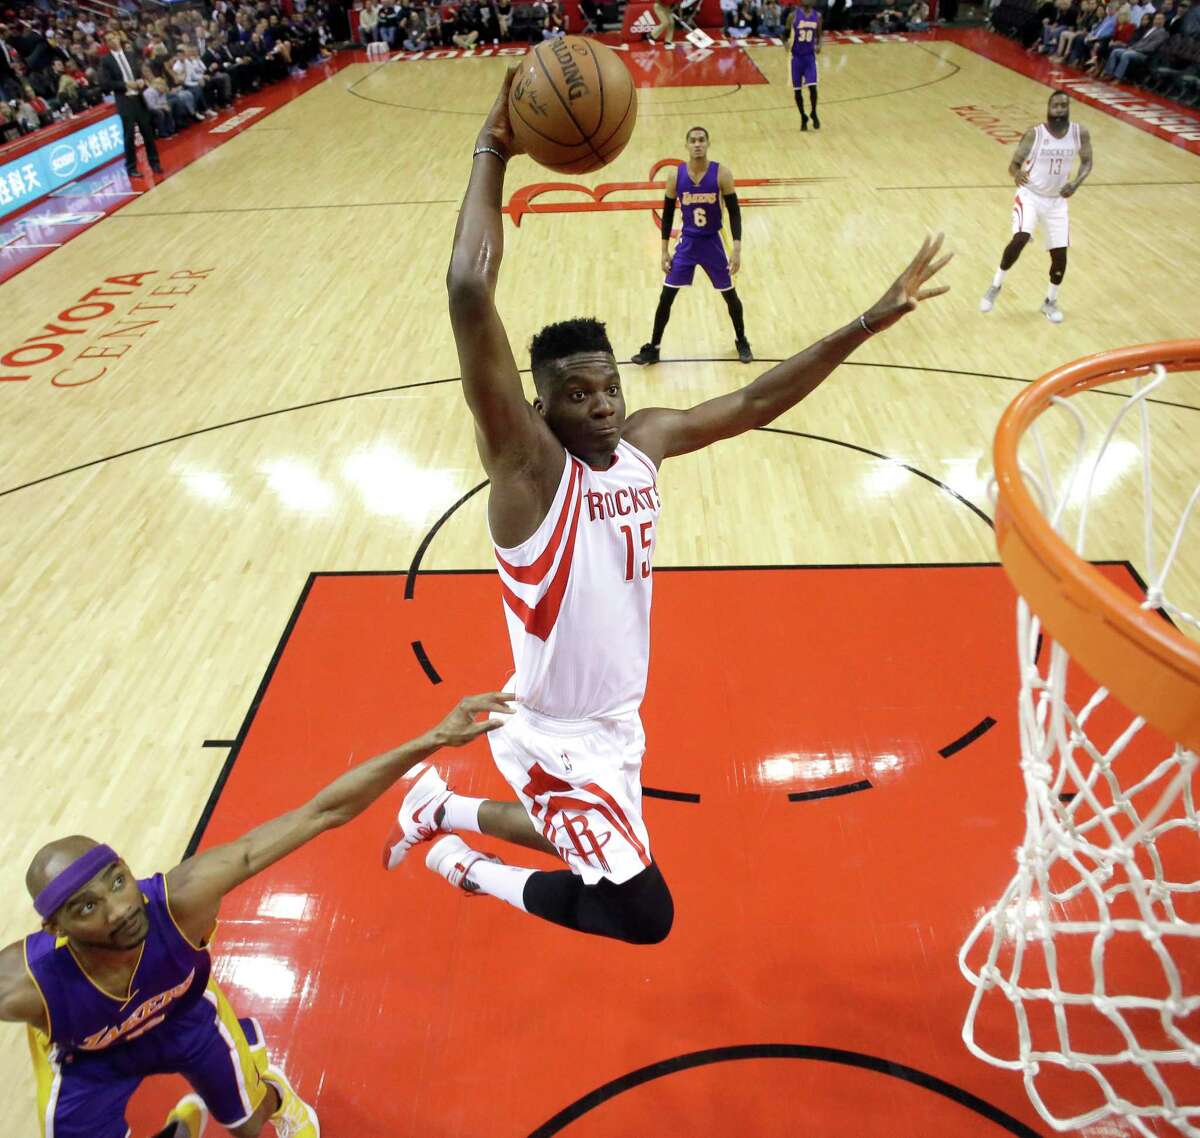 Houston Rockets' Clint Capela (15) goes up to dunk as Los Angeles Lakers' Corey Brewer defends during the first half of an NBA basketball game Wednesday, March 15, 2017, in Houston. (AP Photo/David J. Phillip)